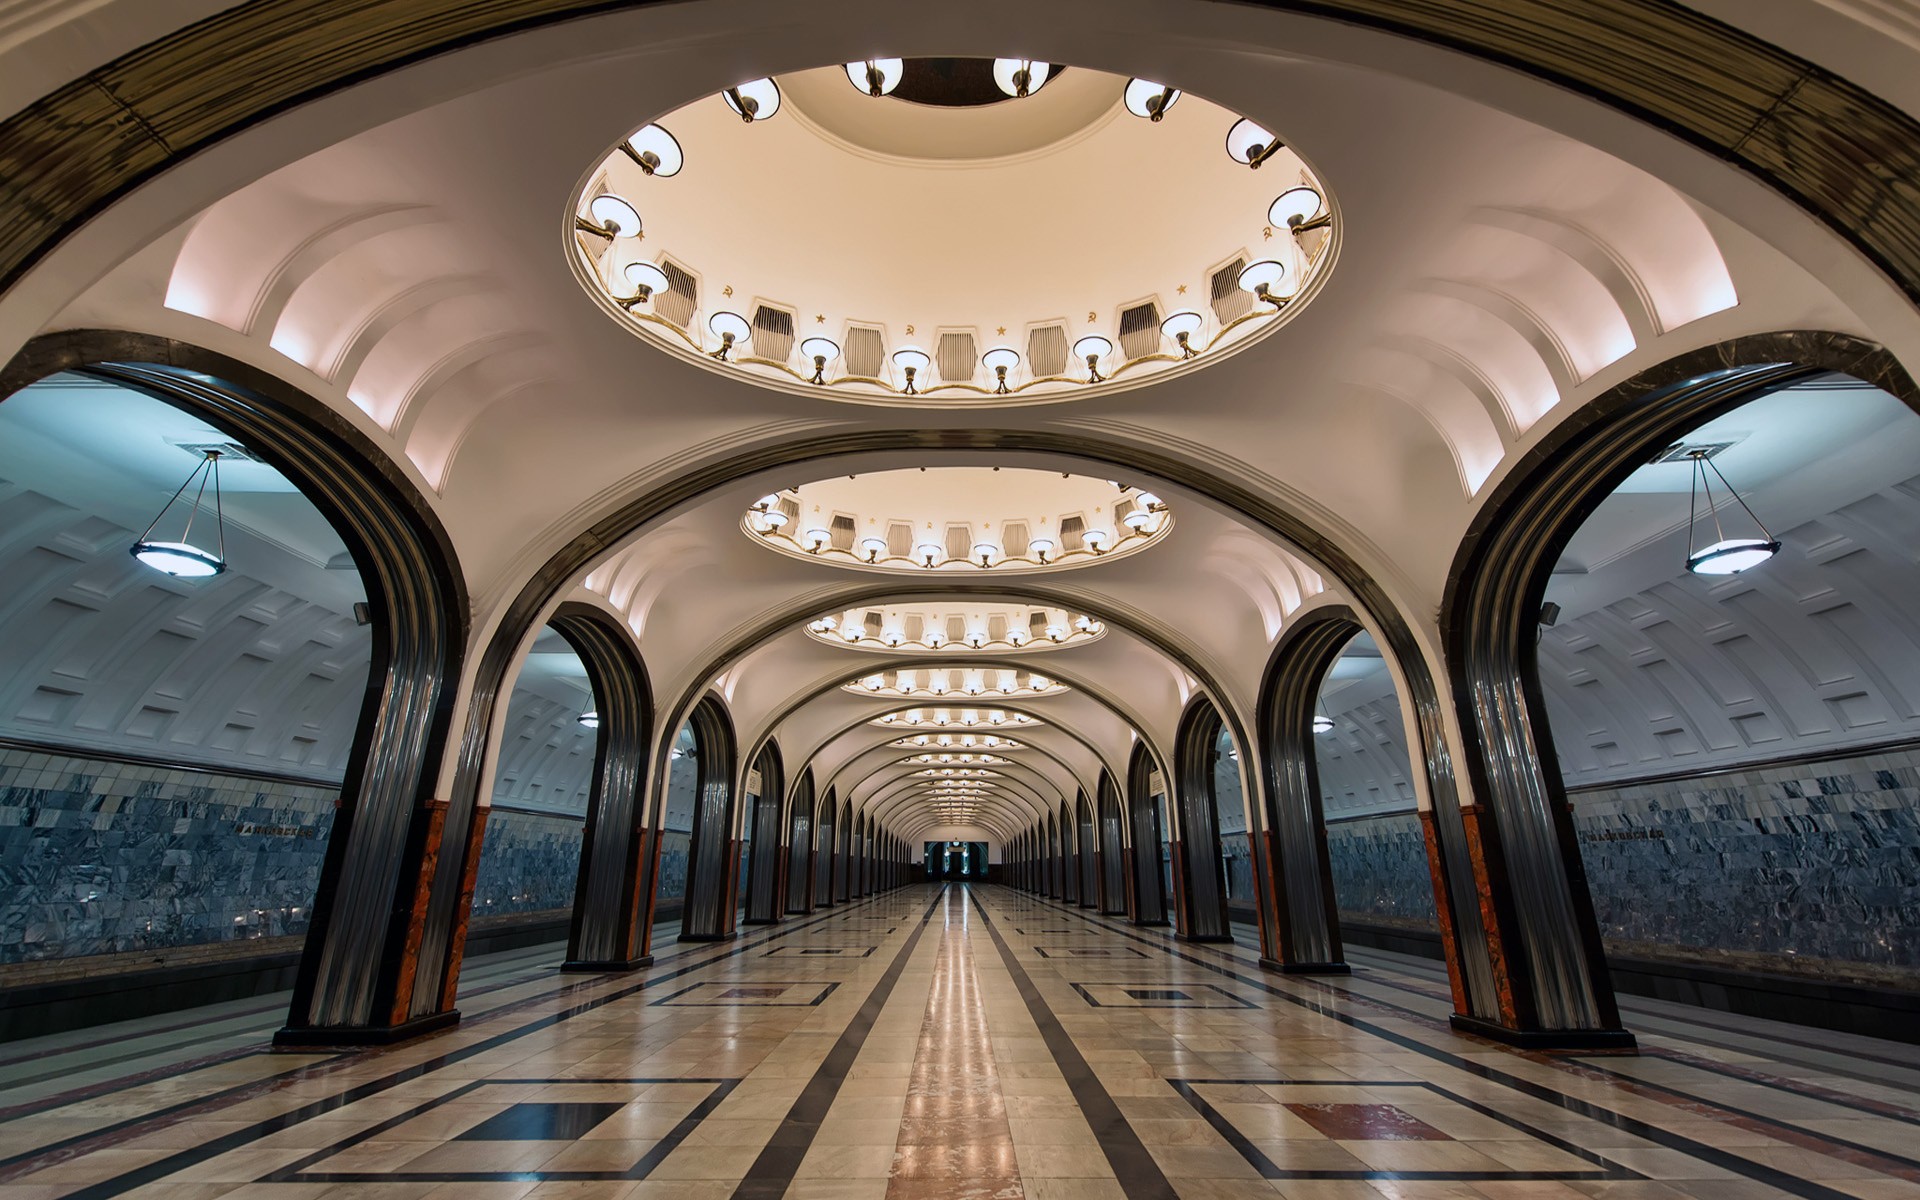 General 1920x1200 architecture Russia subway train station arch tiles lights symmetry circle Moscow